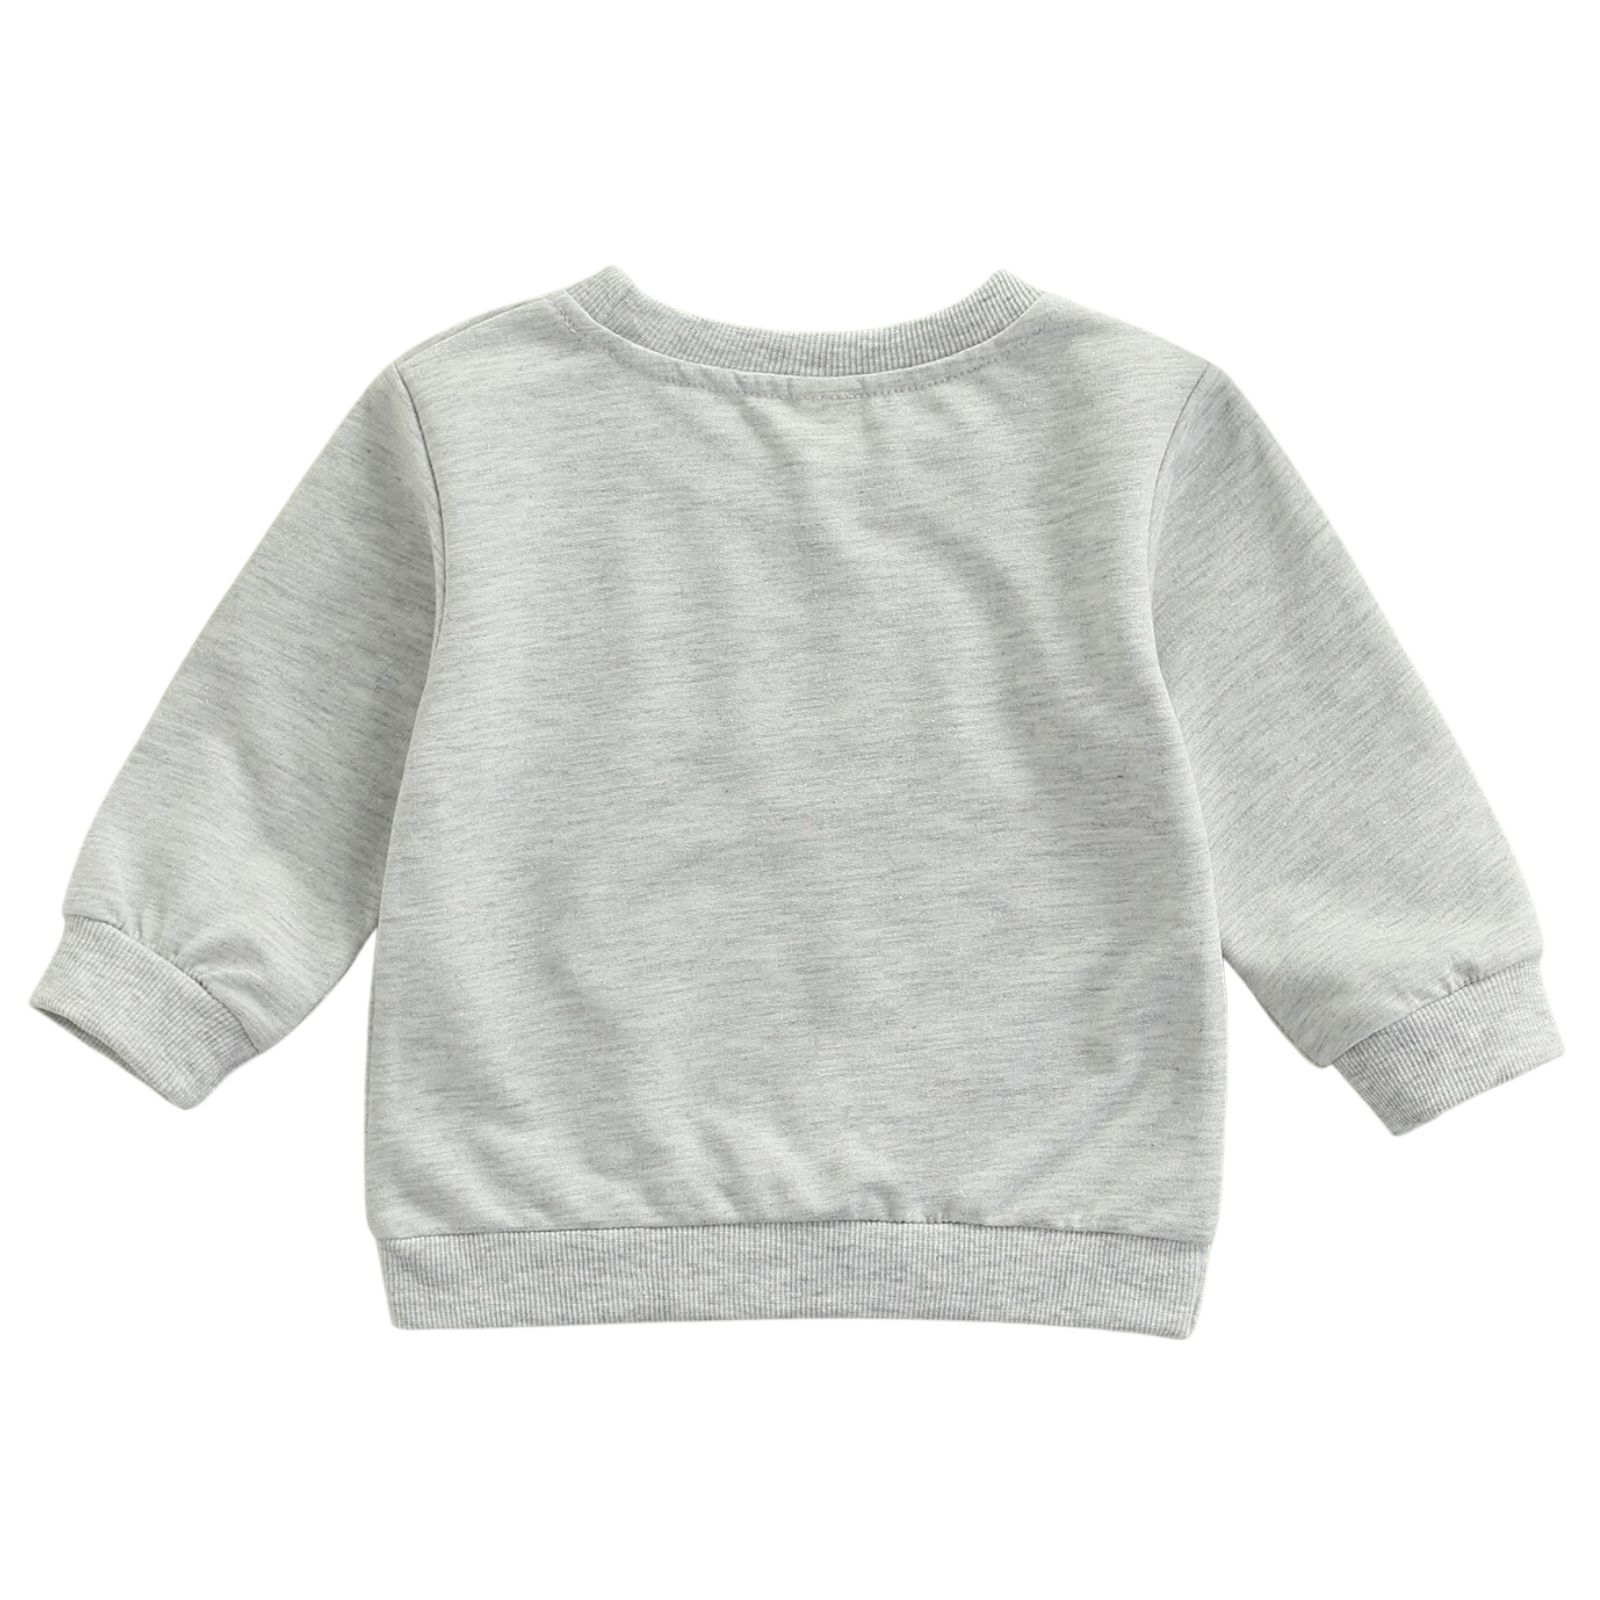 Grey Babes Pullover